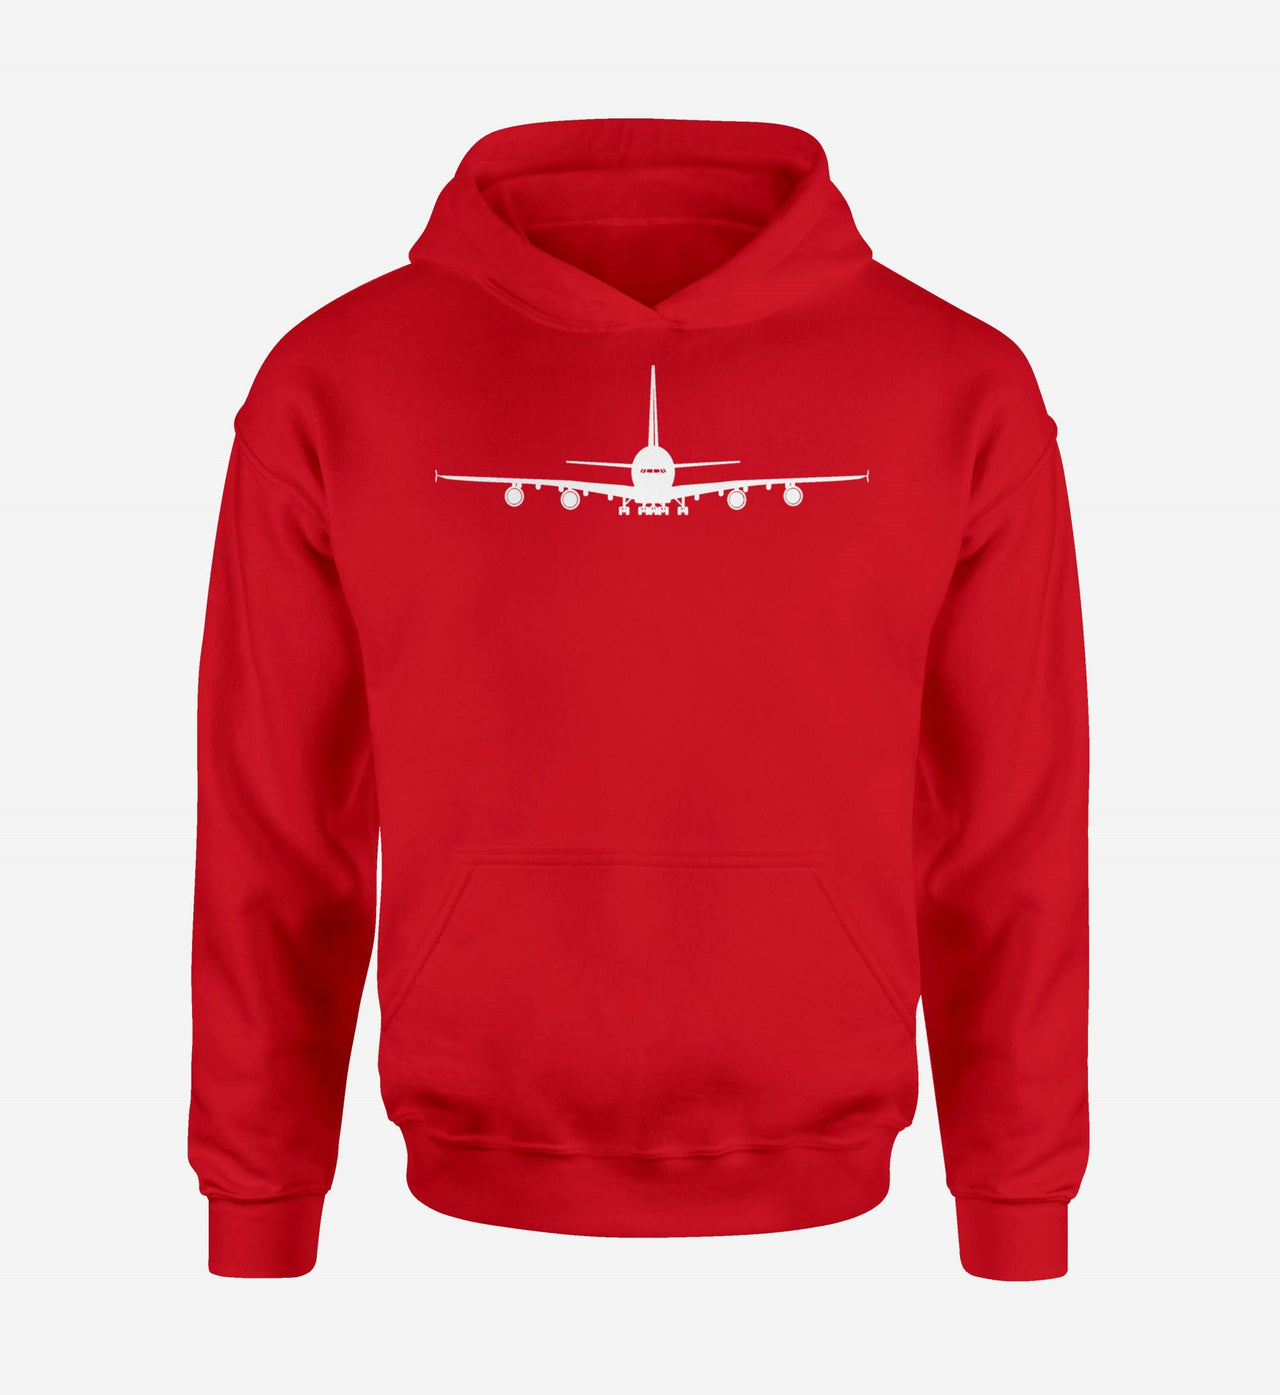 Airbus A380 Silhouette Designed Hoodies